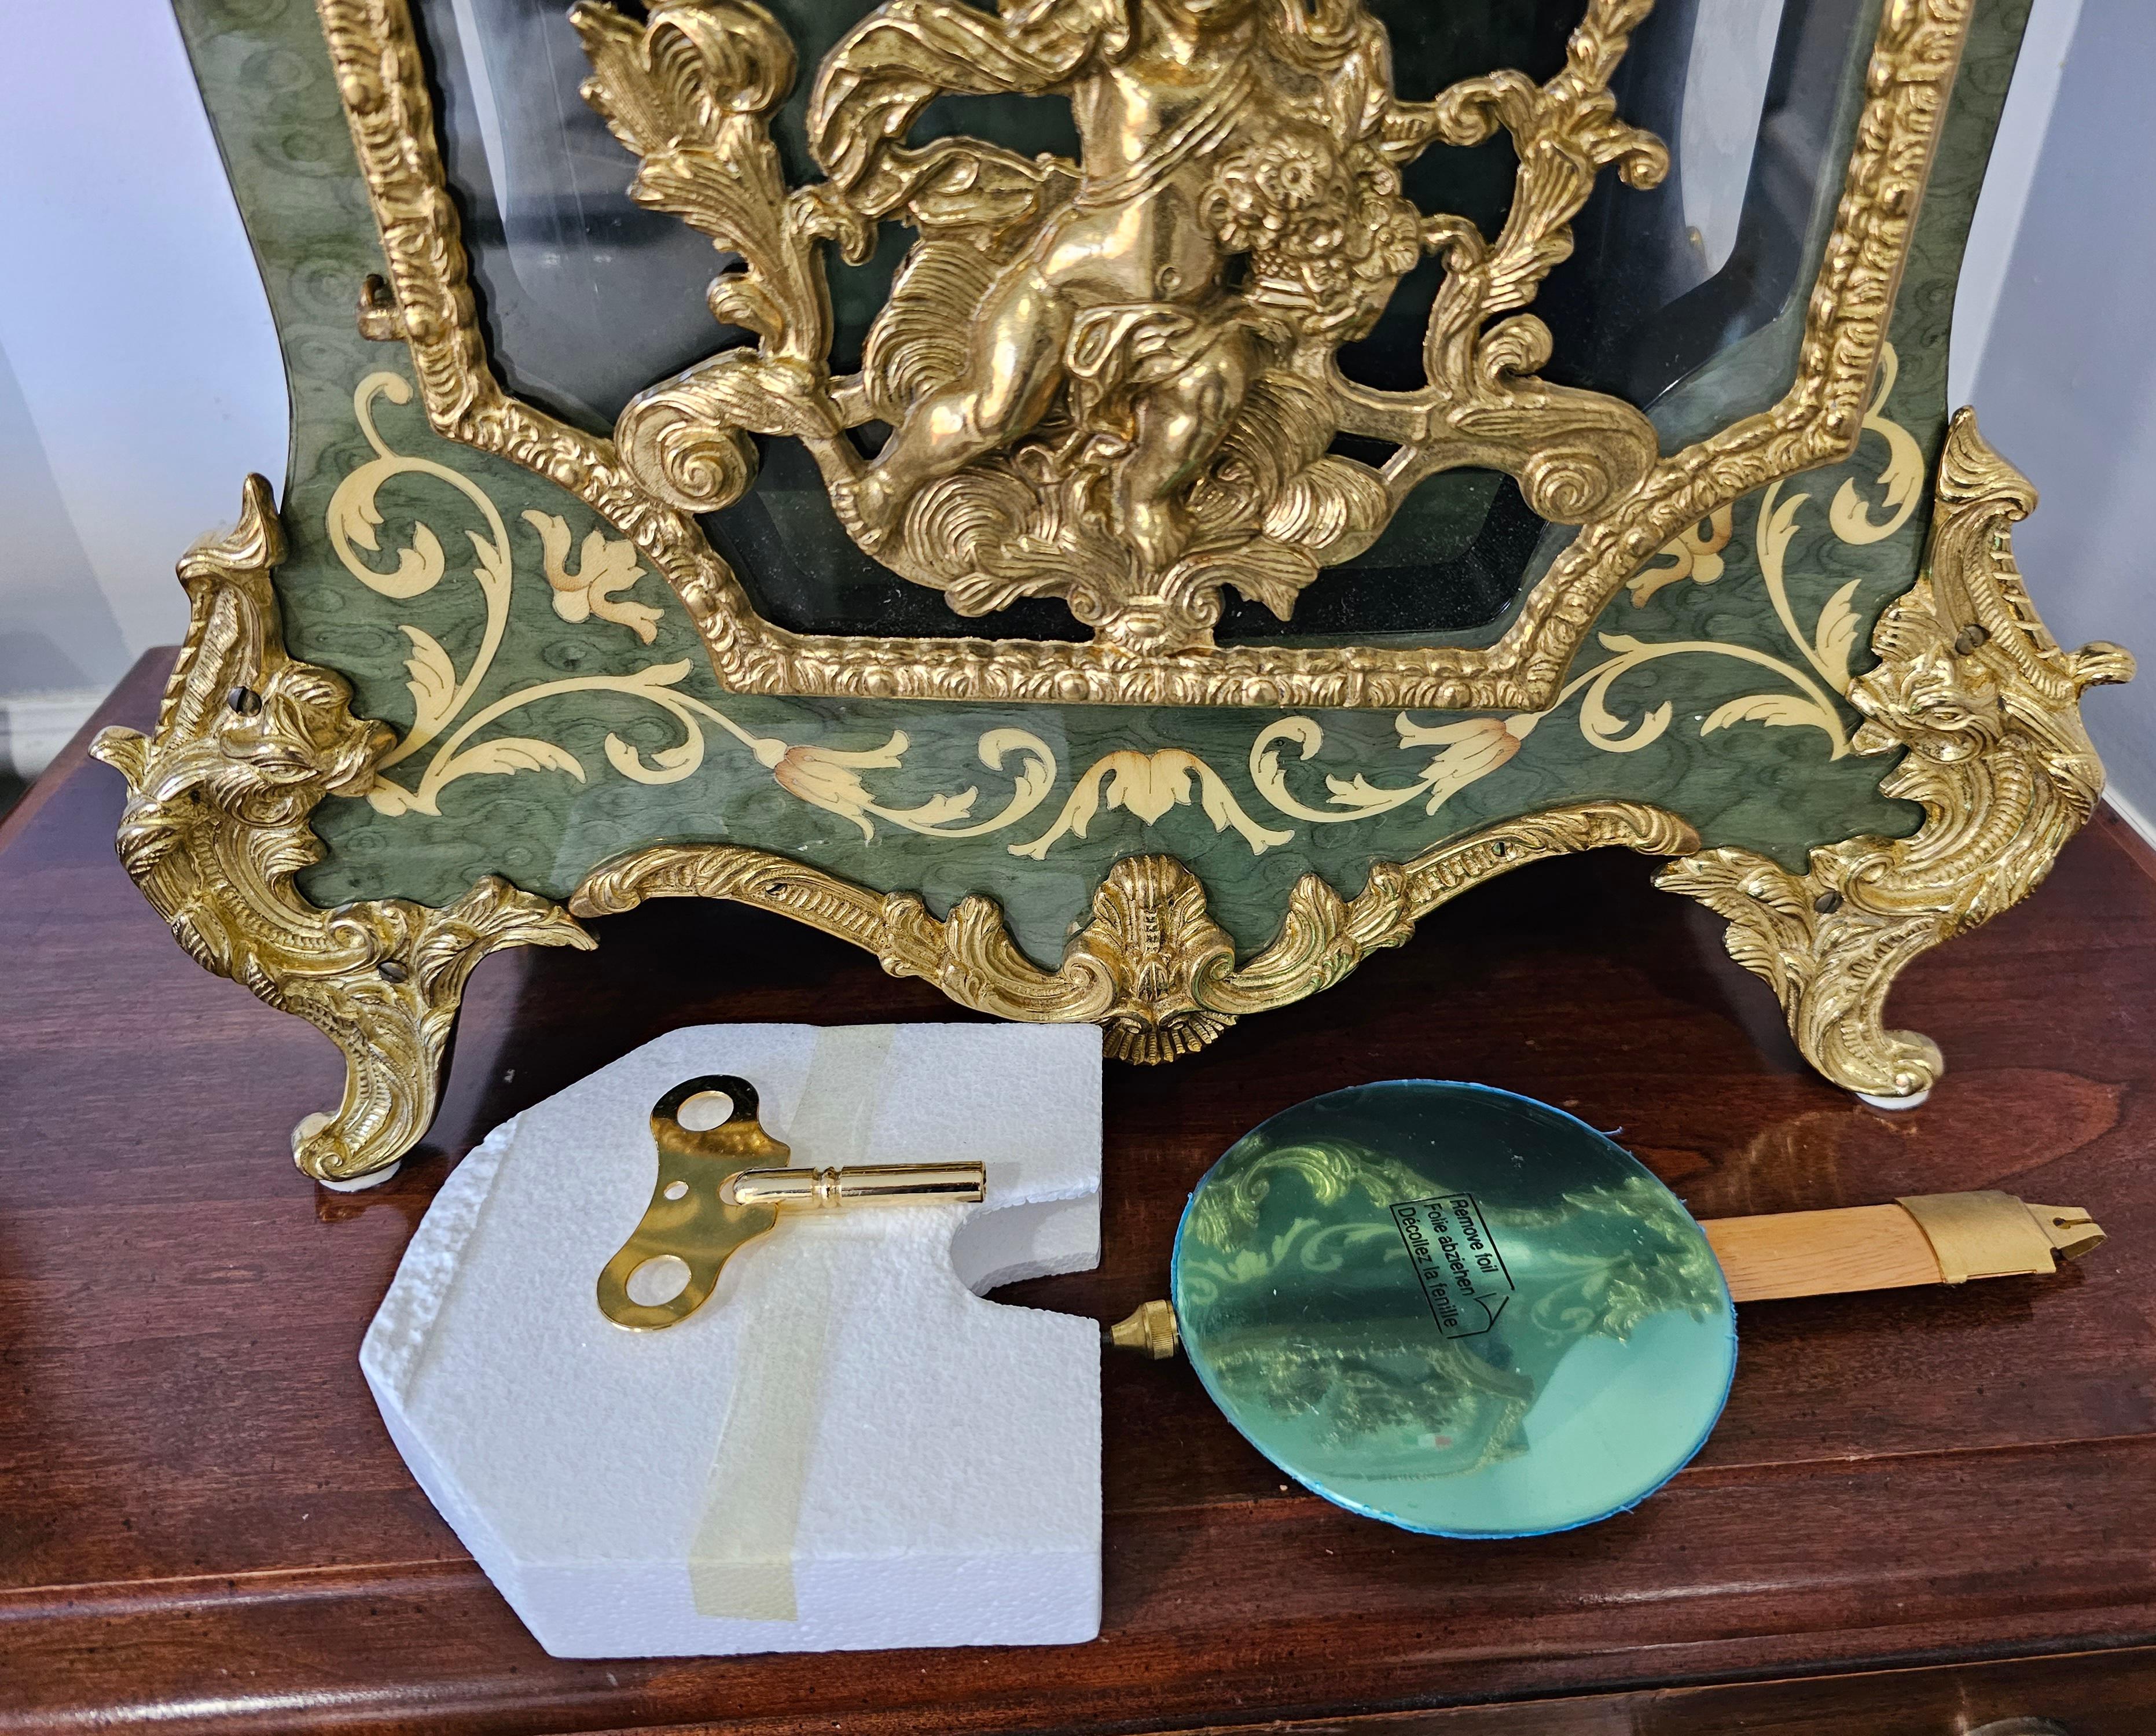 Brass New Franz Hermle Mantel Clock in DeArt Italian Fine Marquetry and Ormolu Case For Sale